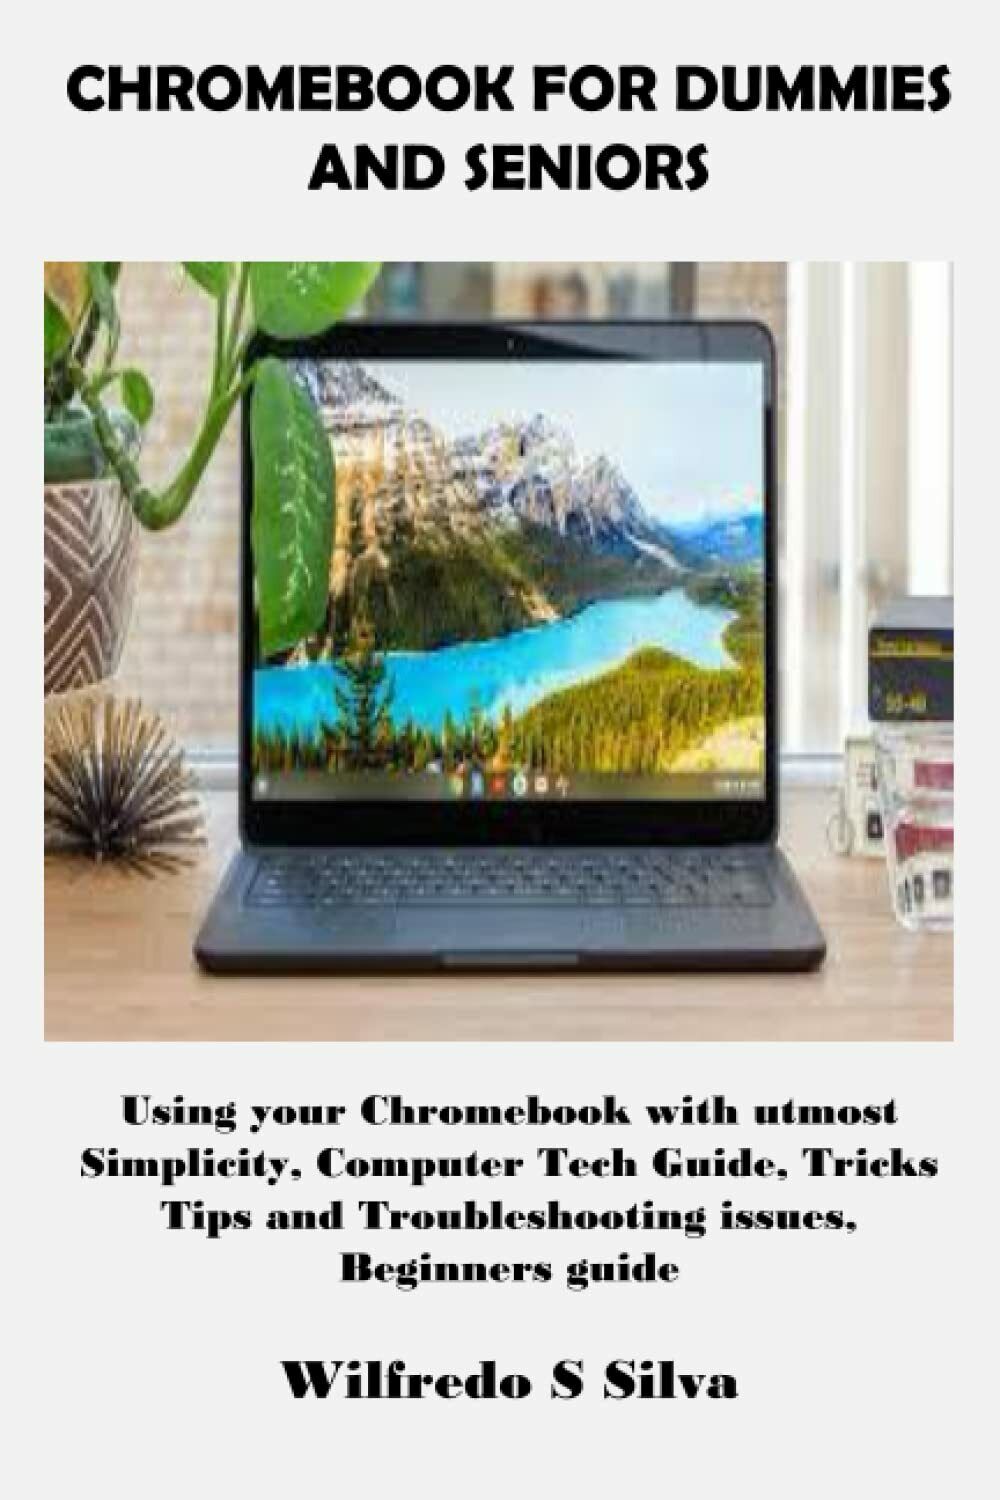 CHROMEBOOK FOR DUMMIES AND SENIORS: Using your Chromebook with utmost Simplicity libro usato